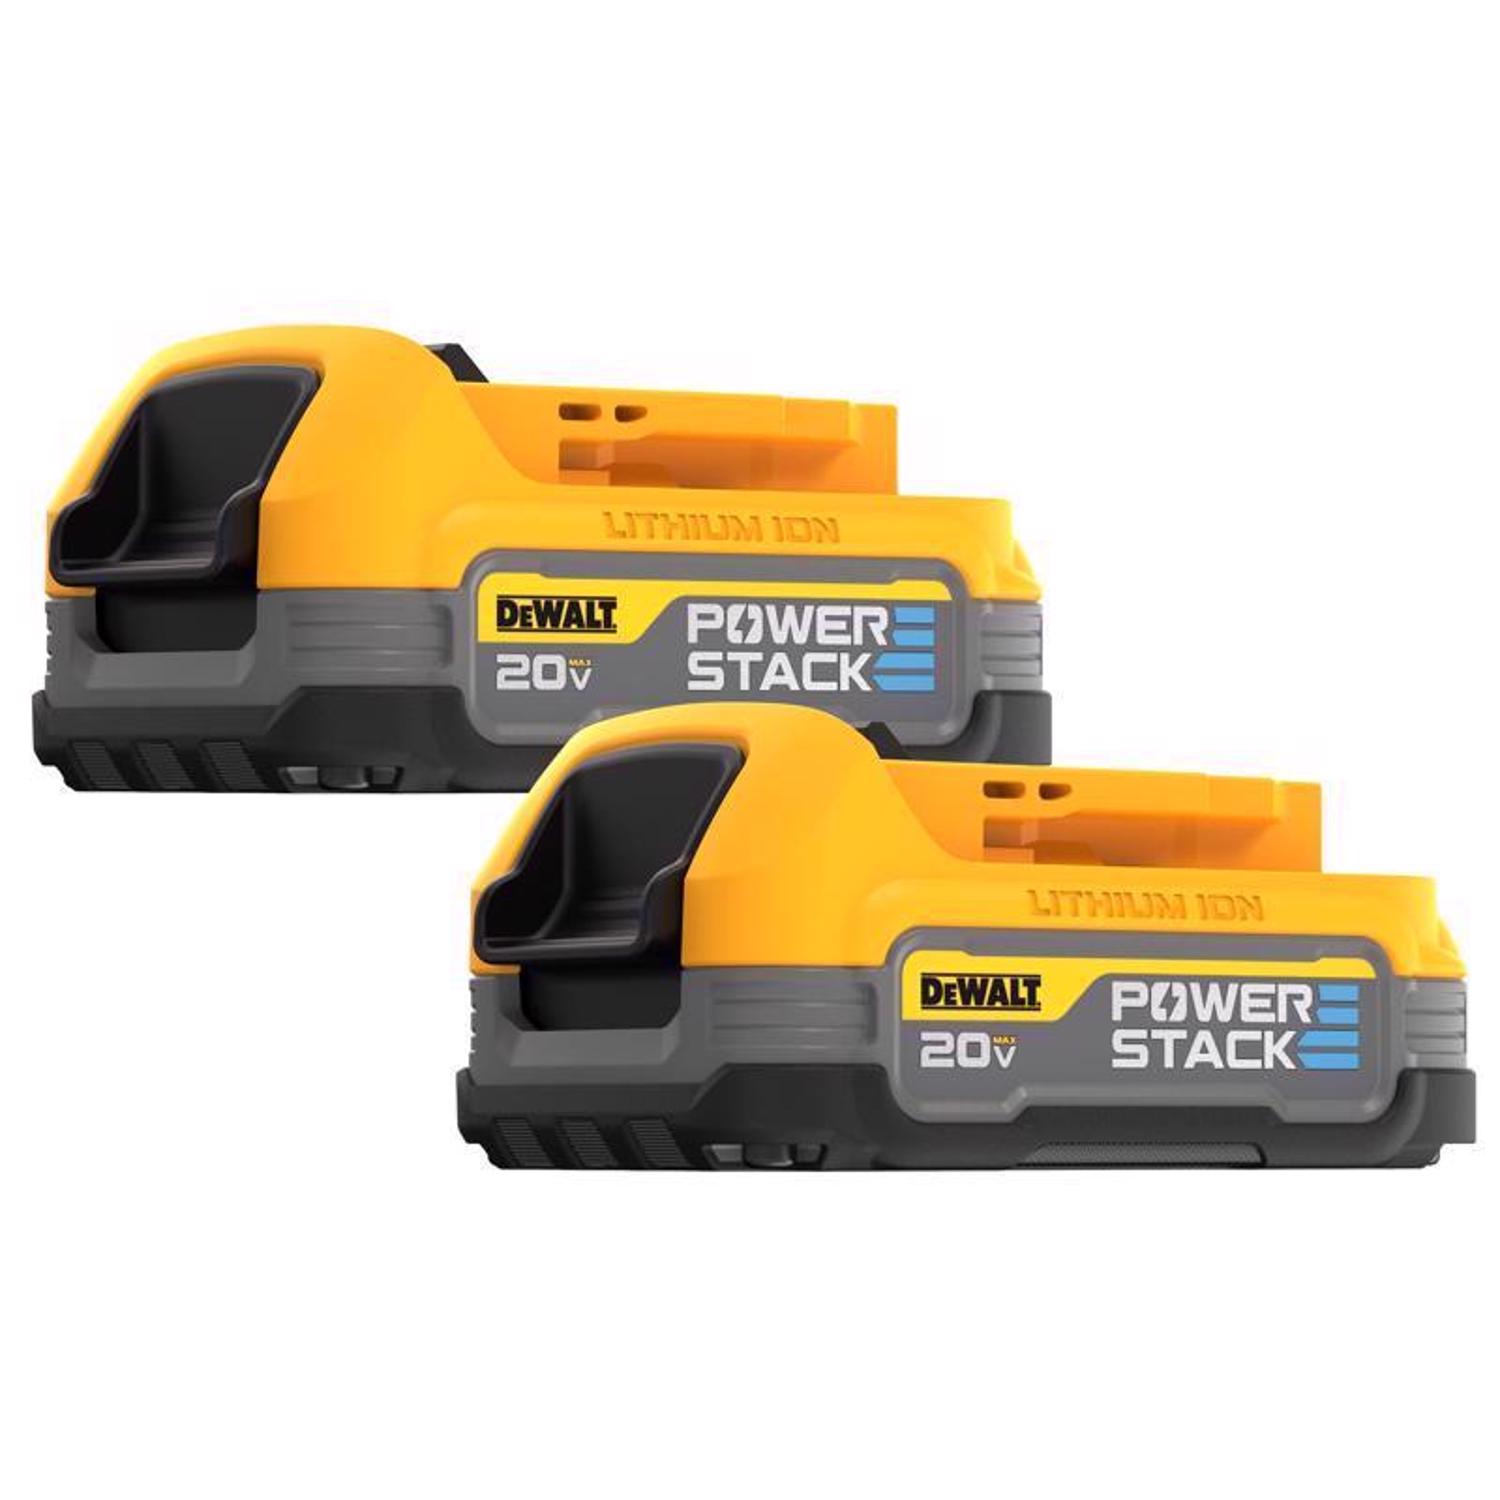 Photos - Power Tool Battery DeWALT 20V MAX POWERSTACK DCBP034-2 Lithium-Ion Compact Battery 2 pc 